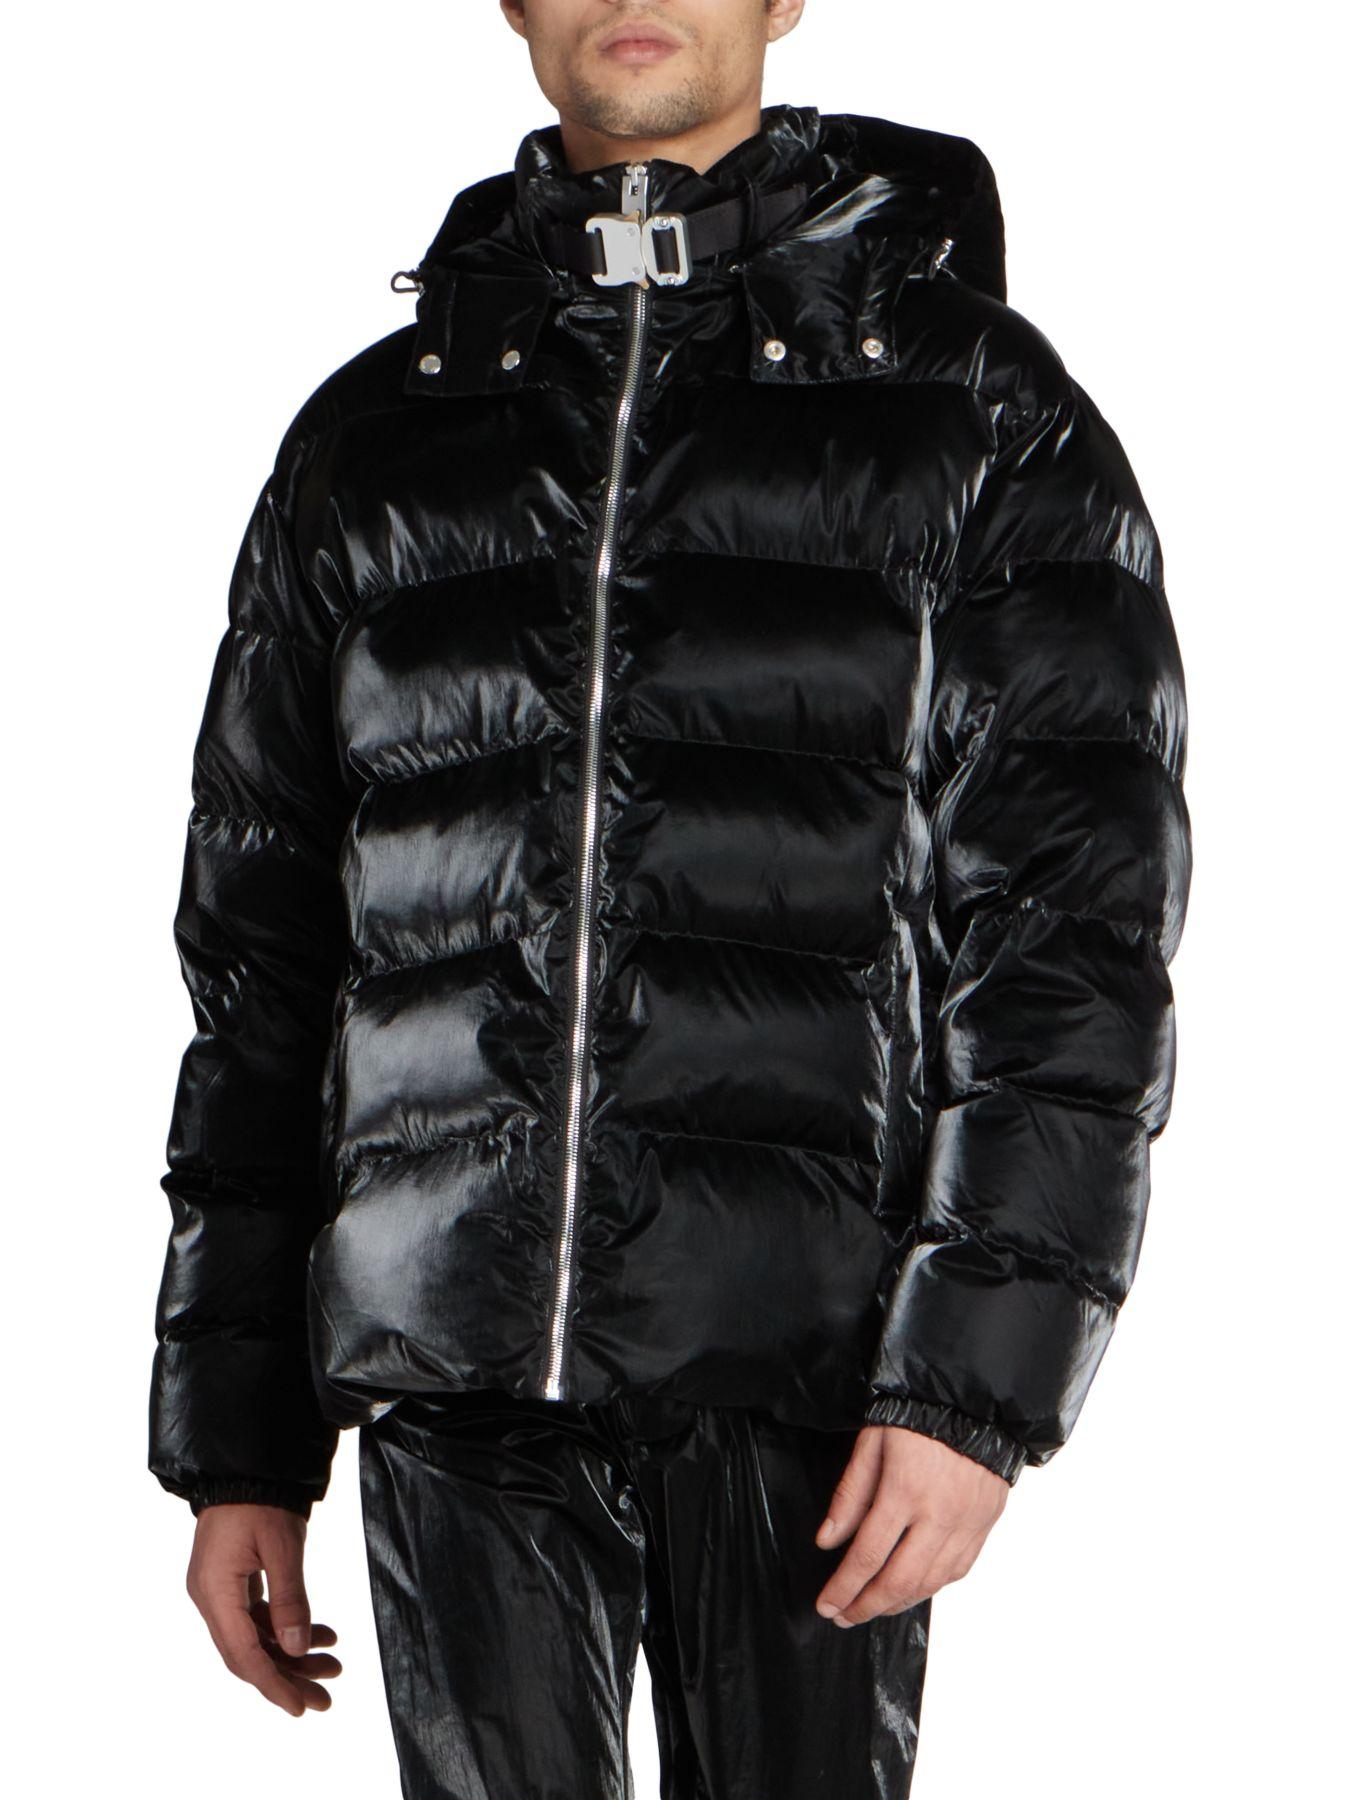 1017 ALYX 9SM Synthetic Nightrider Puffer Jacket in Black for Men - Lyst